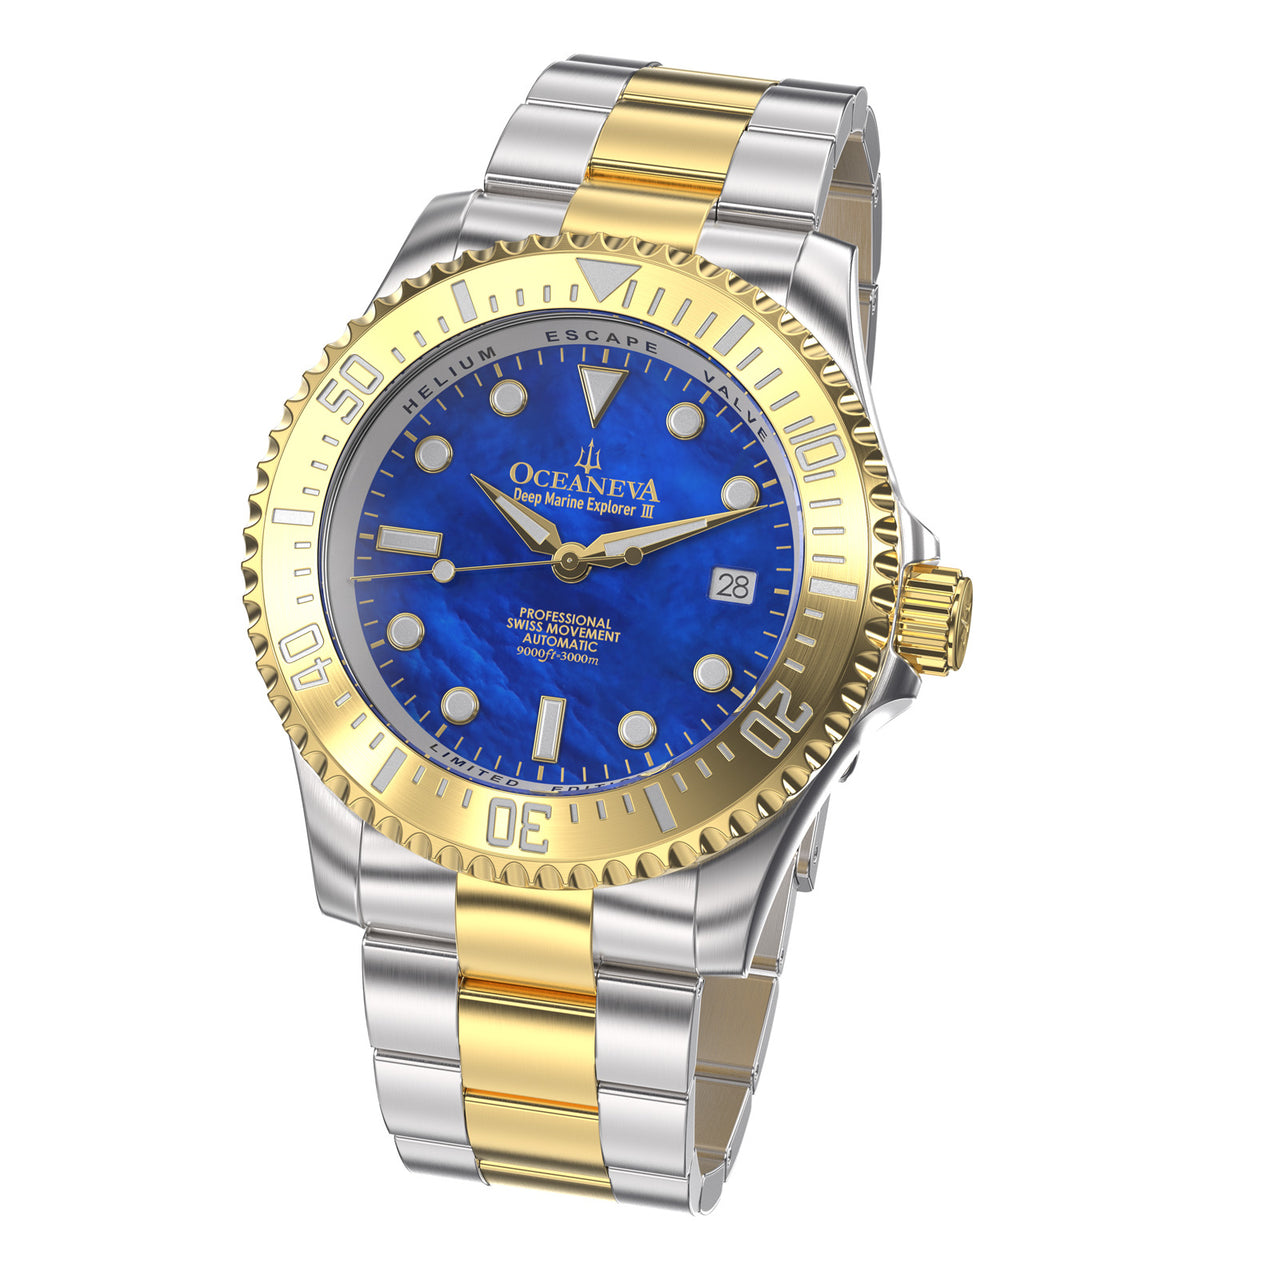 Oceaneva 3000M Dive Watch Blue Mother of Pearl and Gold Front Picture Slight Left Slant View